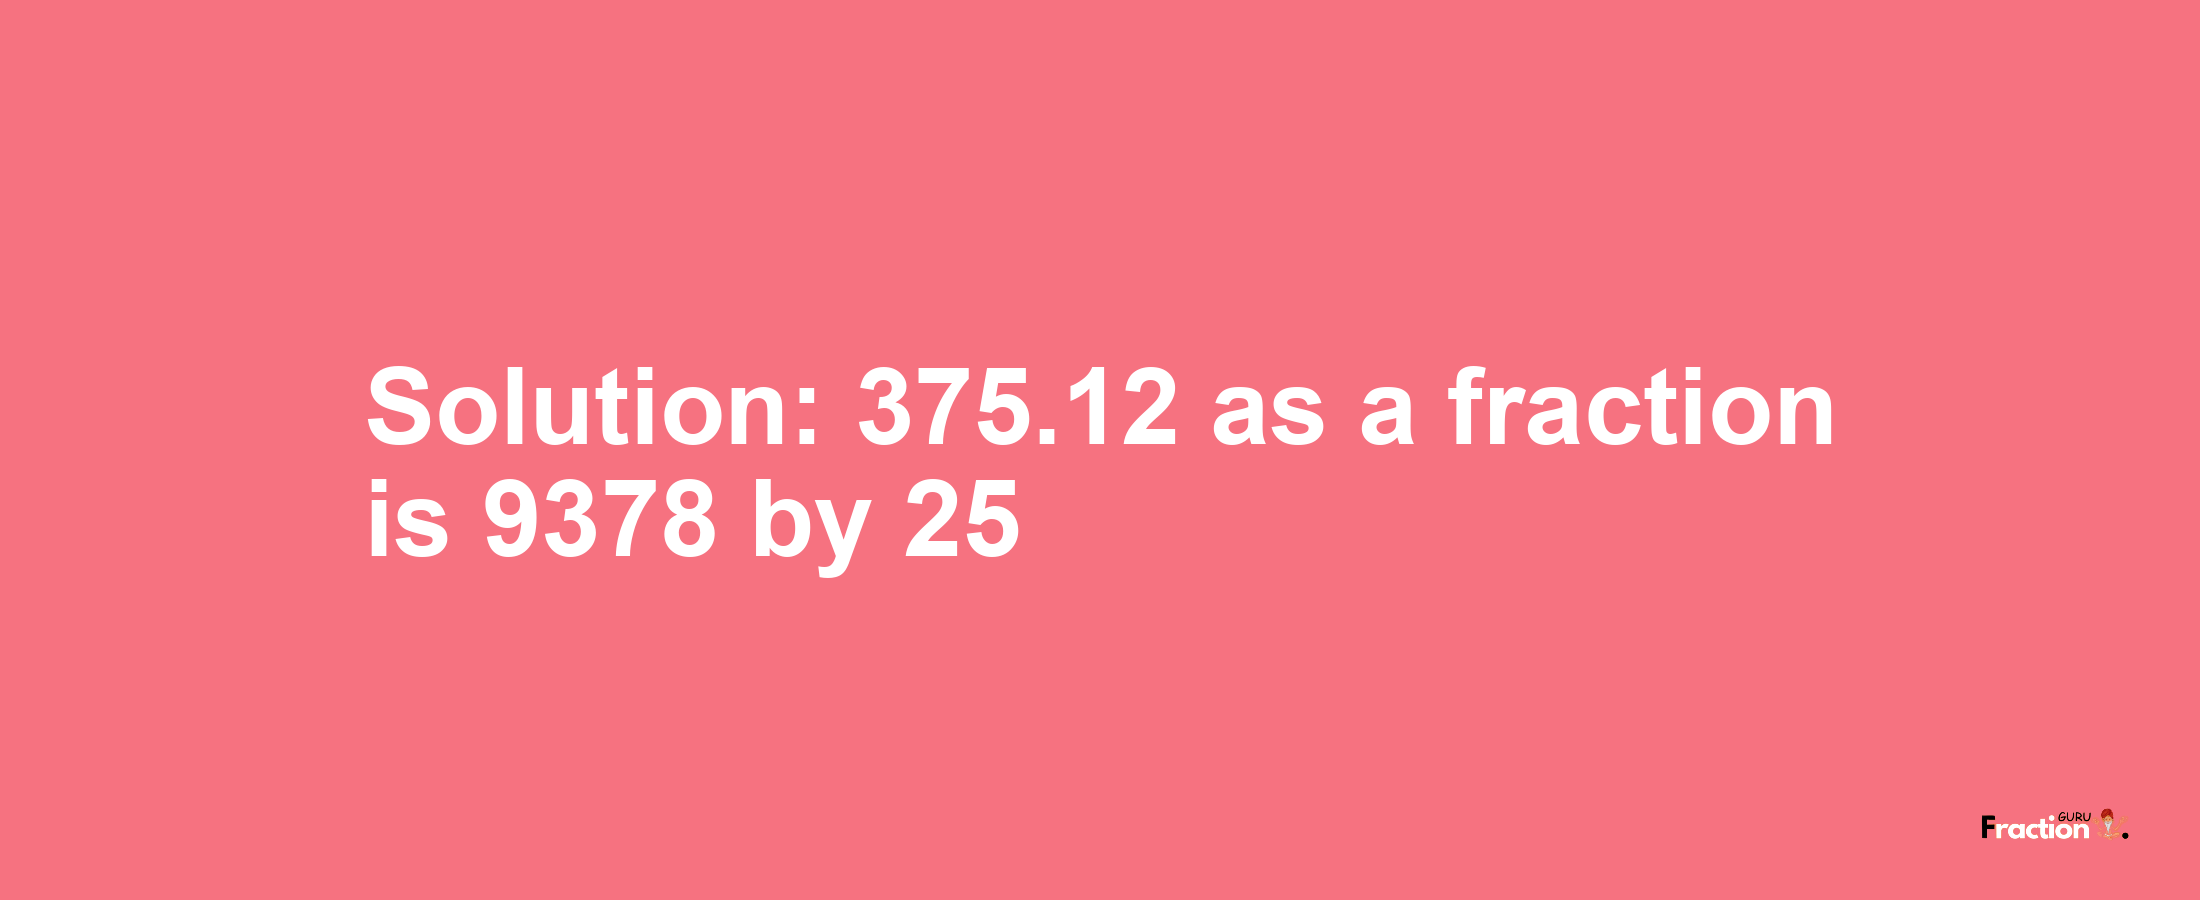 Solution:375.12 as a fraction is 9378/25